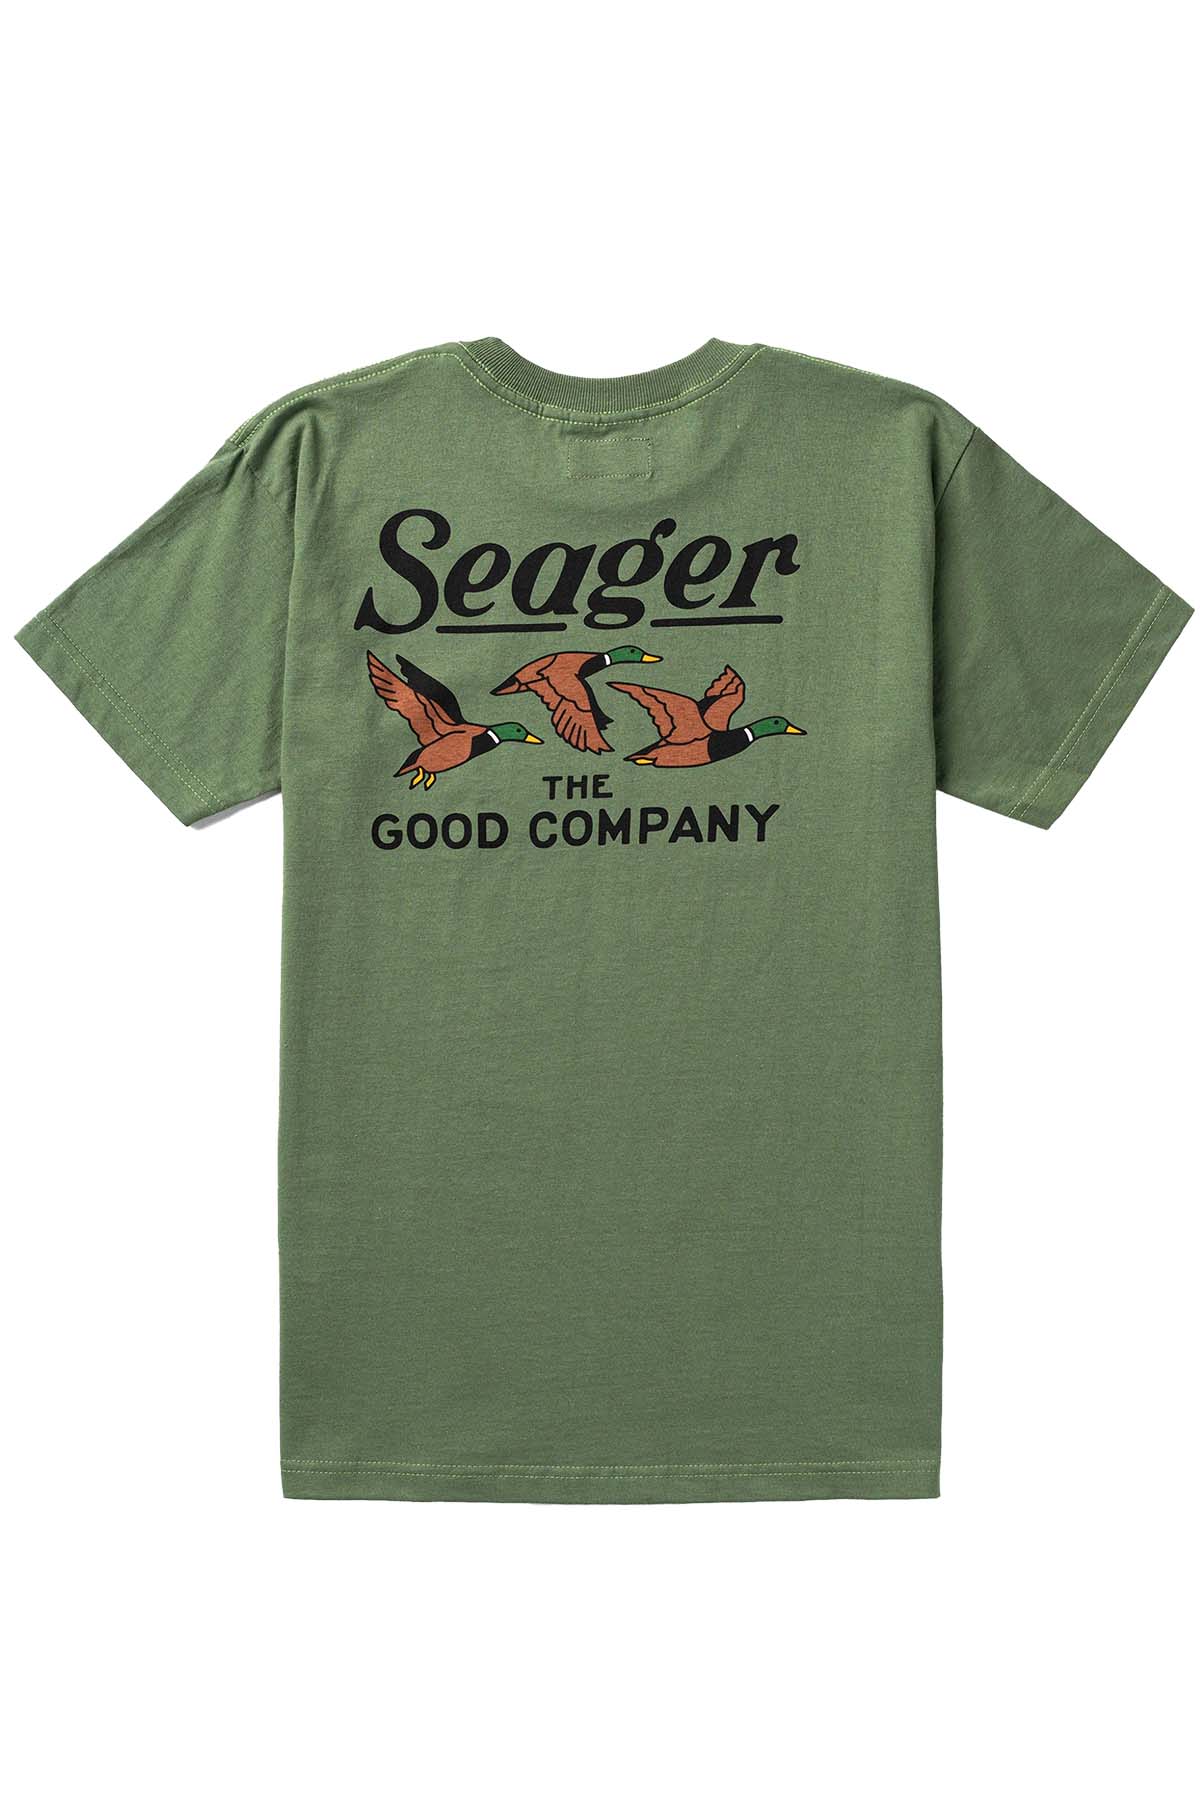 Seager - The Good Company Tee - Army Green - Back